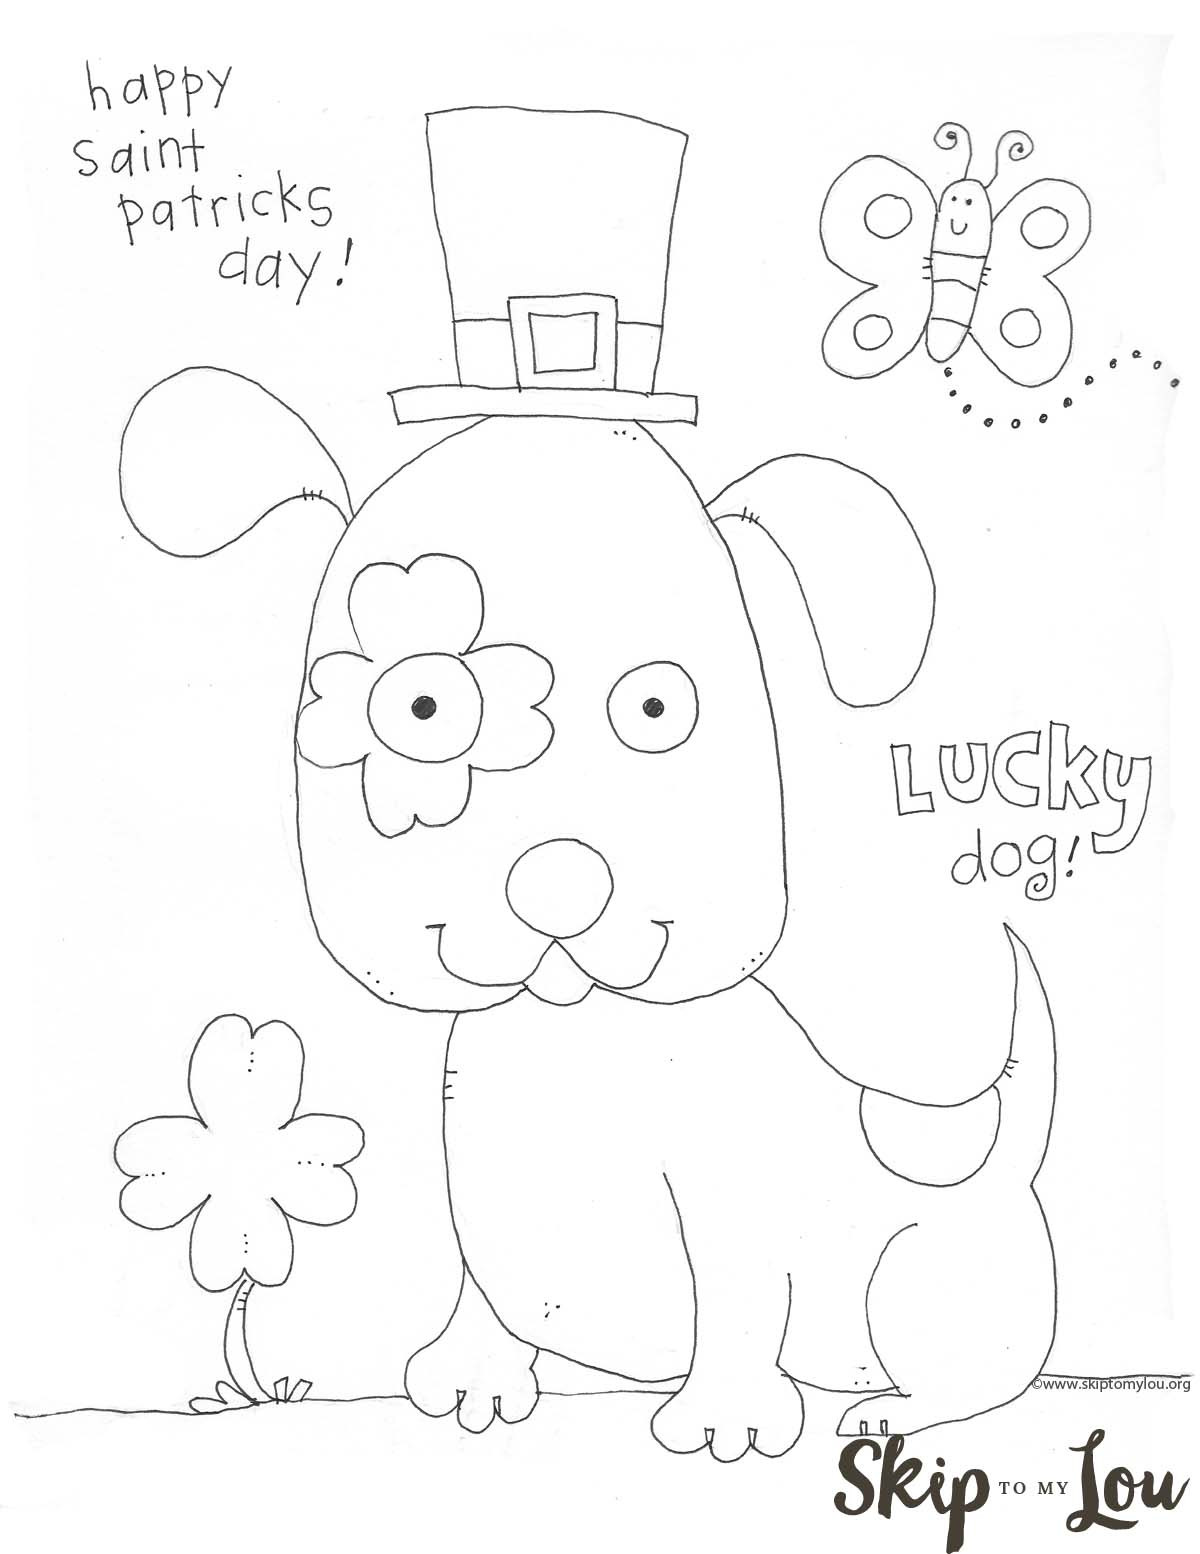 St Patrick'S Day Coloring Pages For Kids
 St Patricks Day Coloring Page for Preschoolers